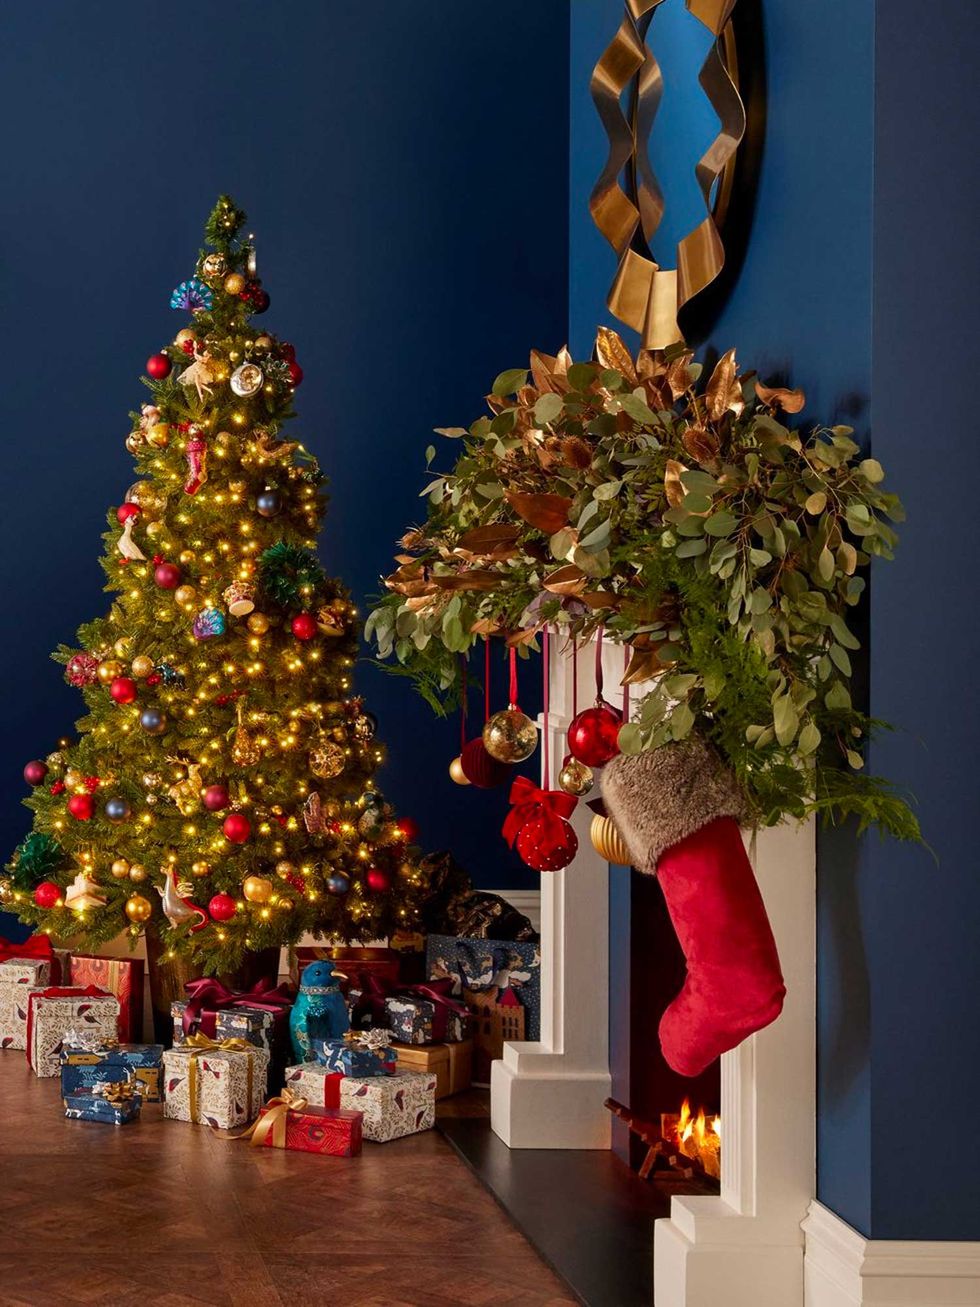 Christmas decorations: When is it best to put up the tree? The earlier the  better according to experts